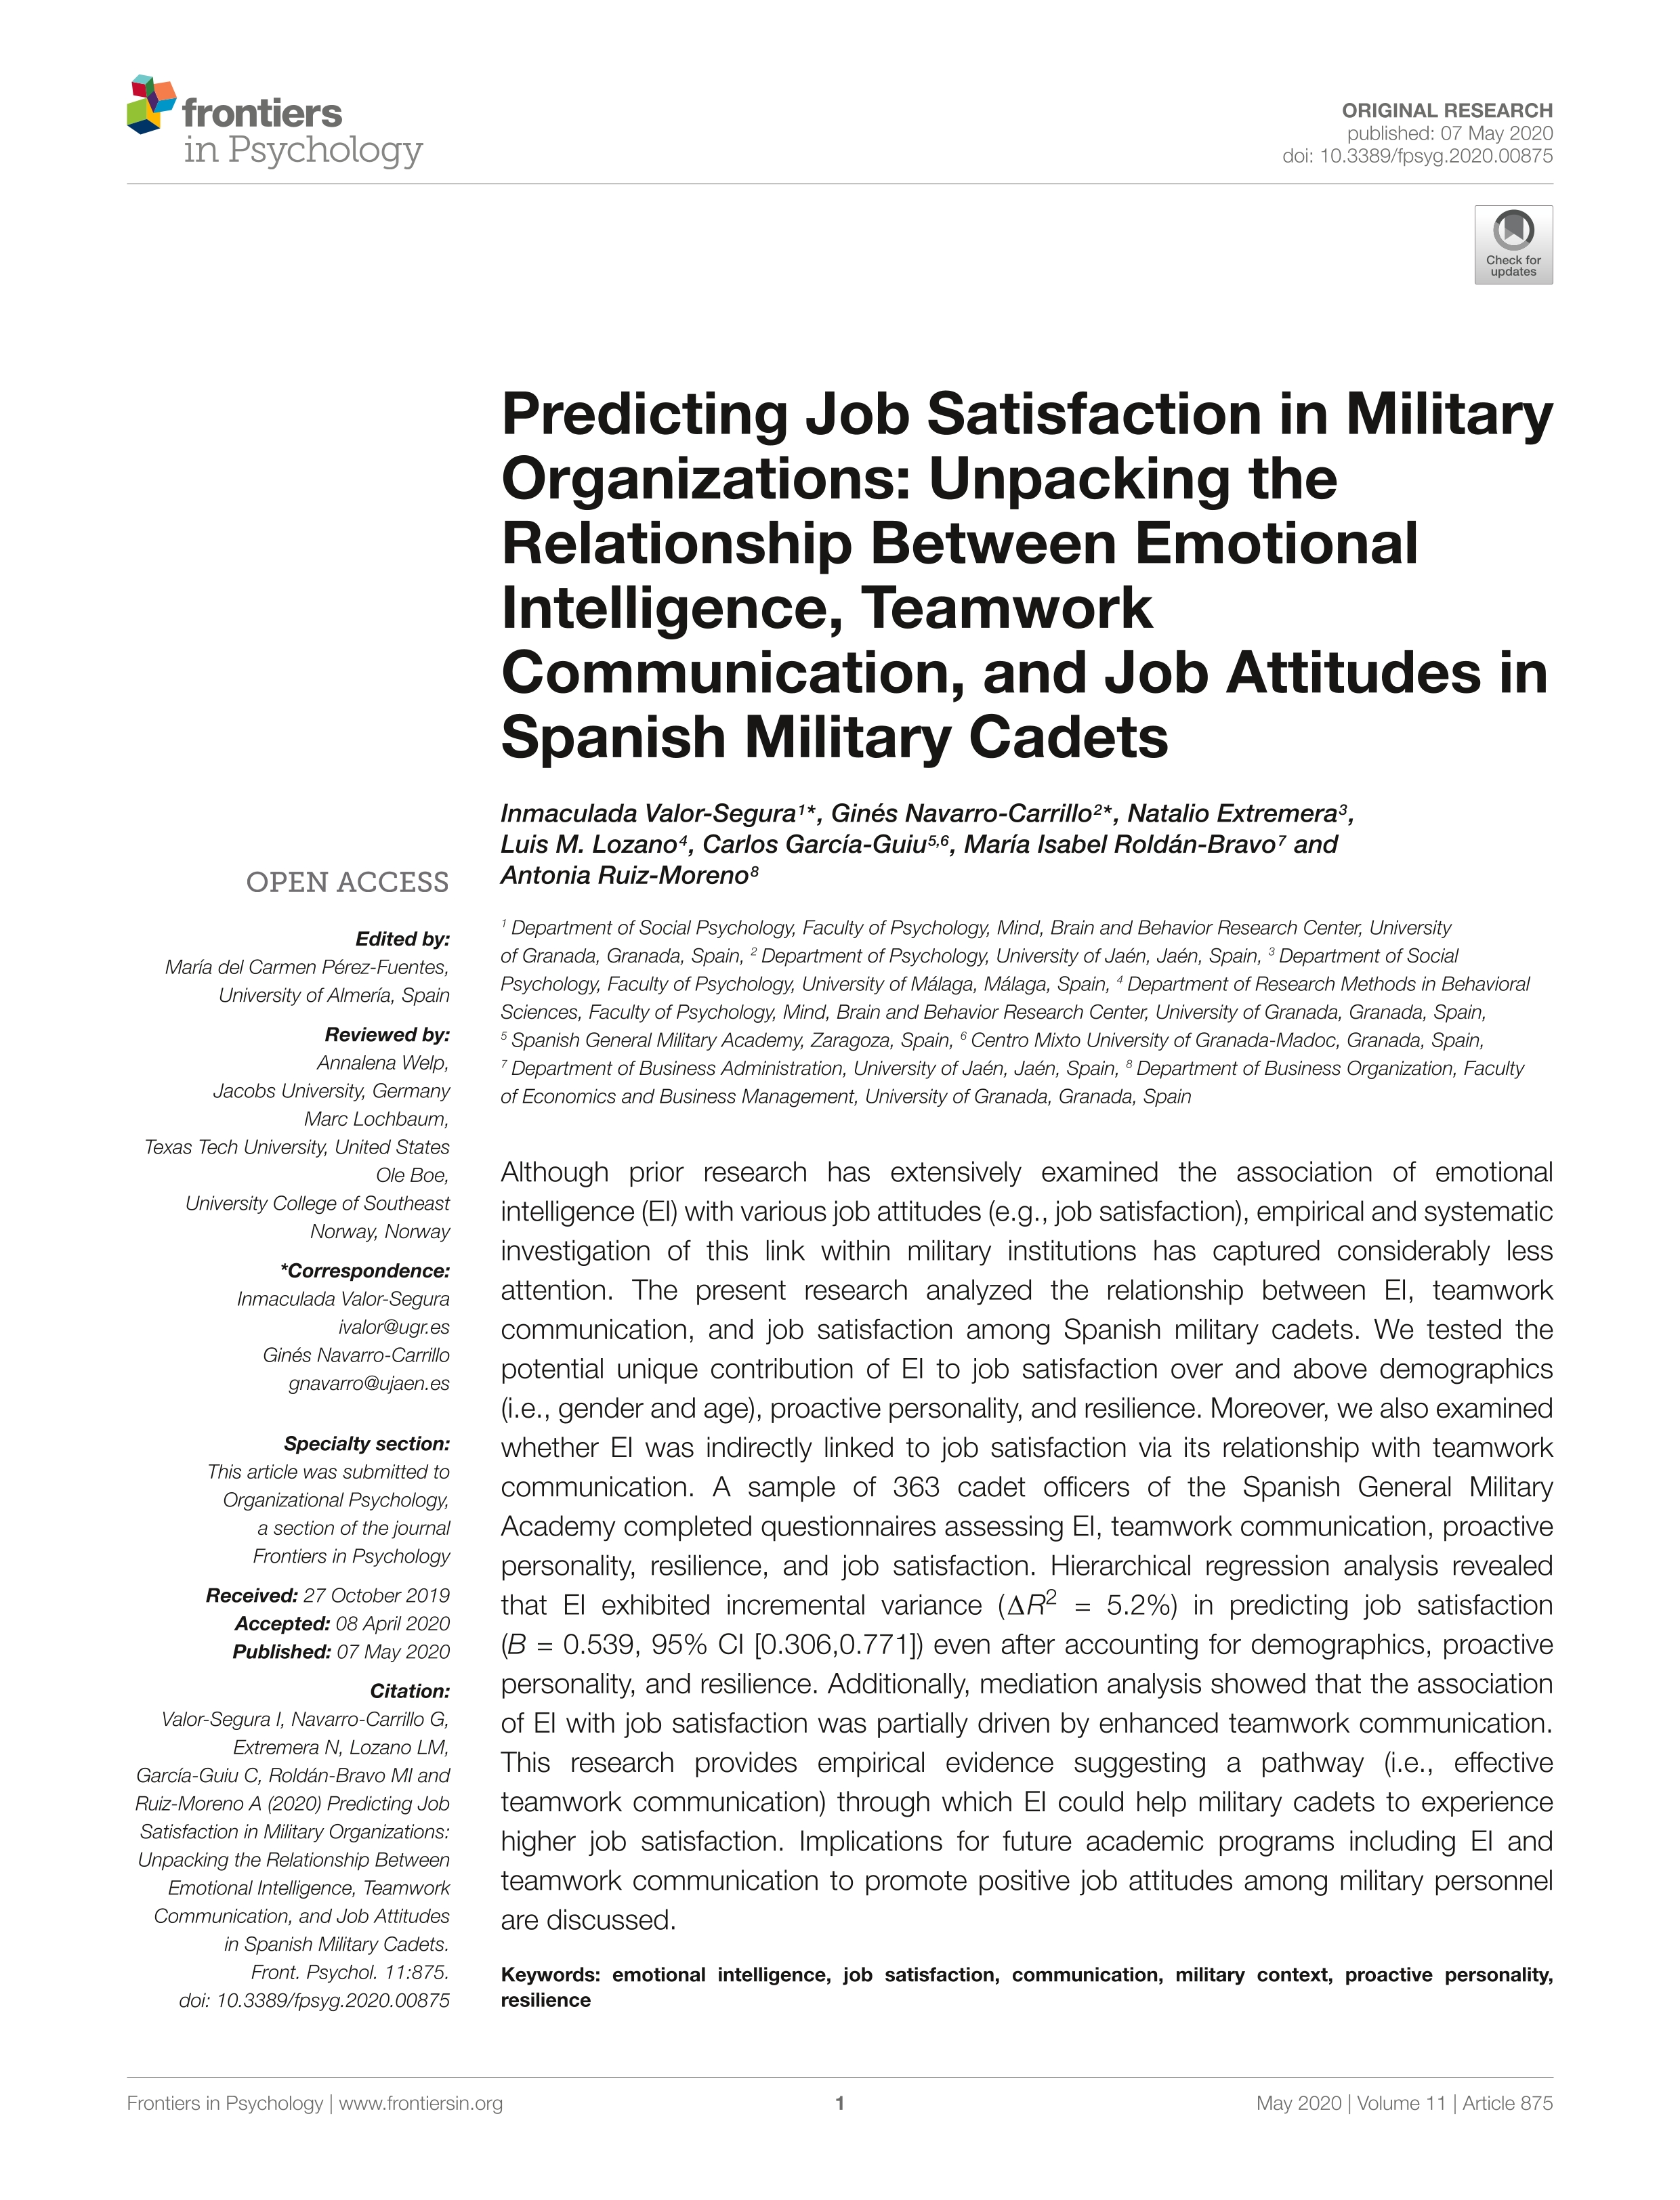 Predicting job satisfaction in military organizations: unpacking the relationship between emotional intelligence, teamwork communication, and job attitudes in Spanish military cadets